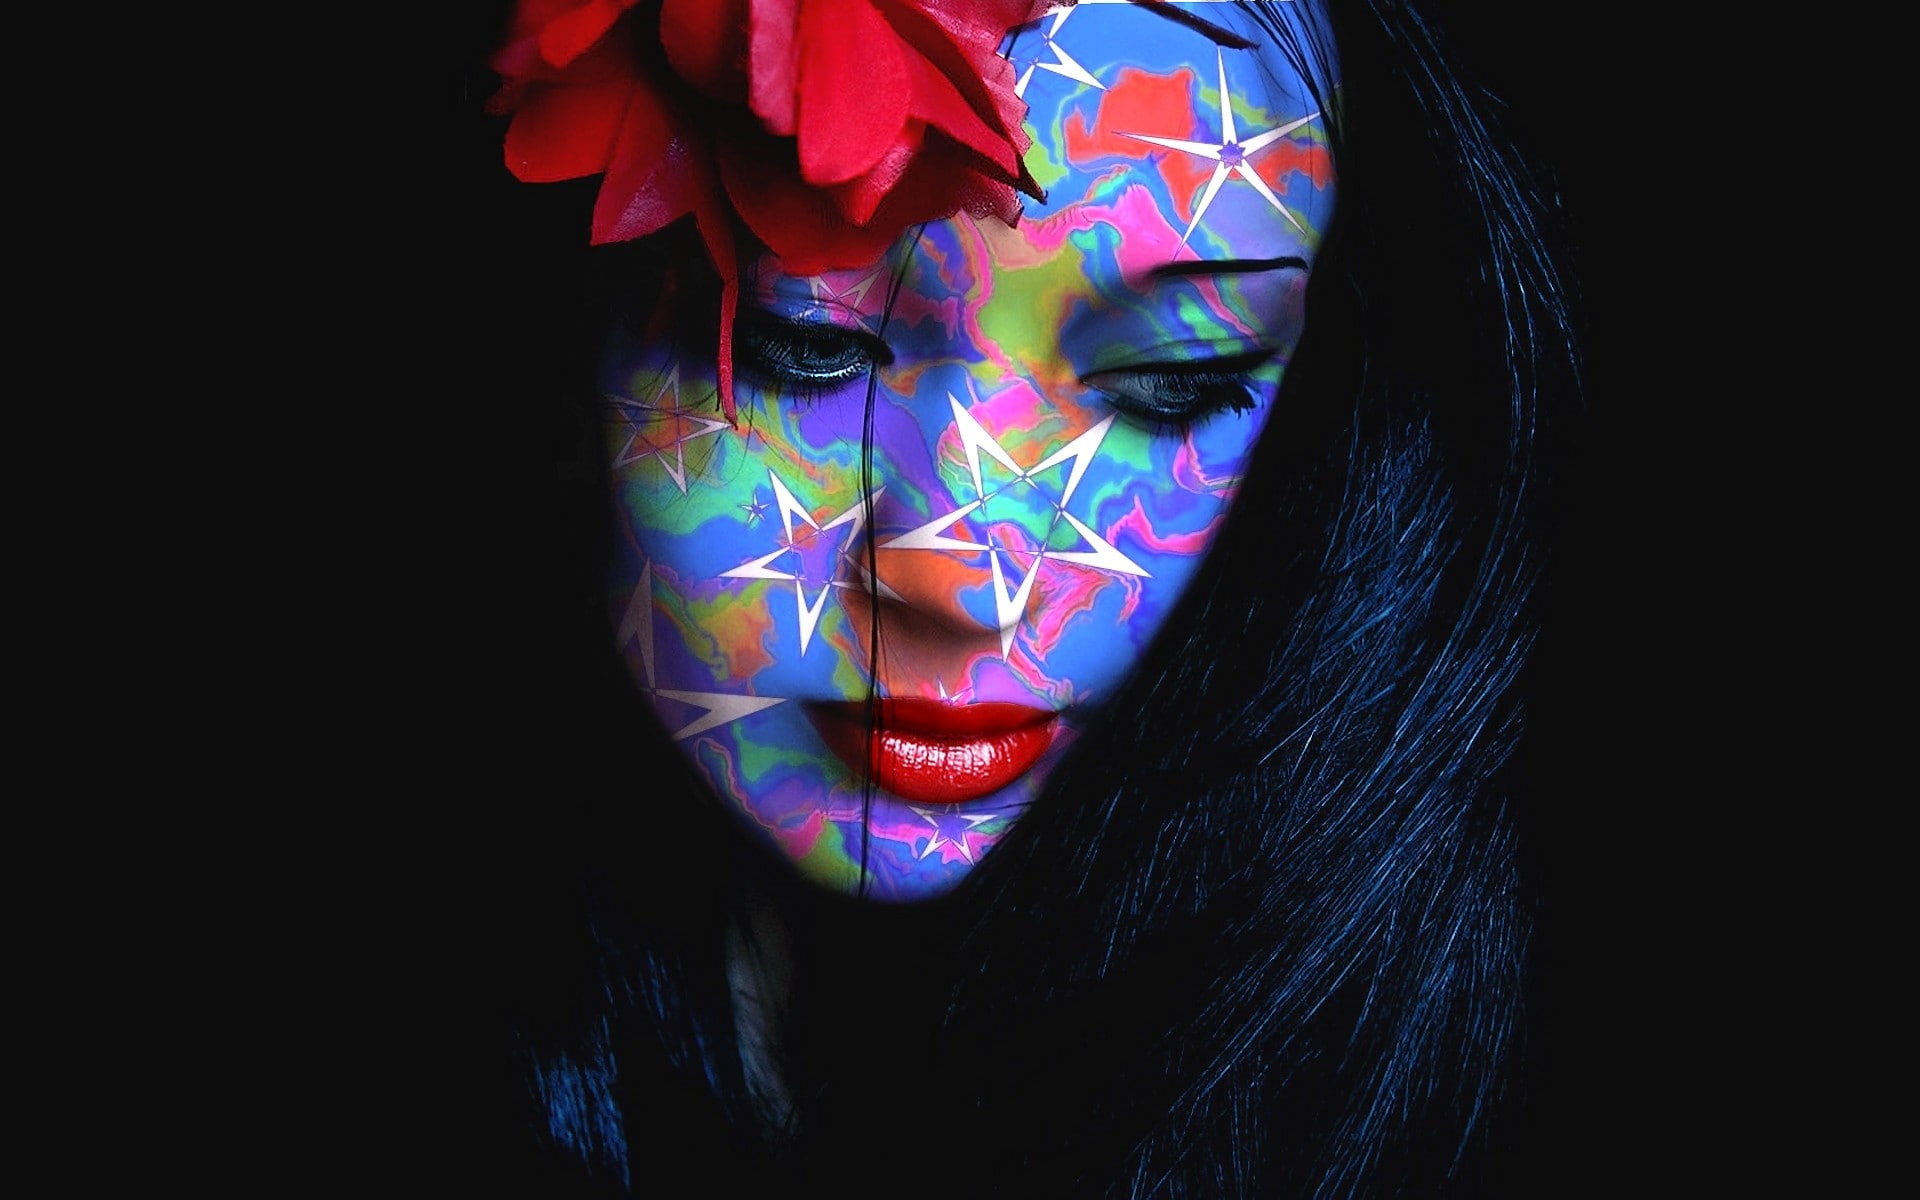 women, colorful, flower in hair, face, red lipstick, face paint